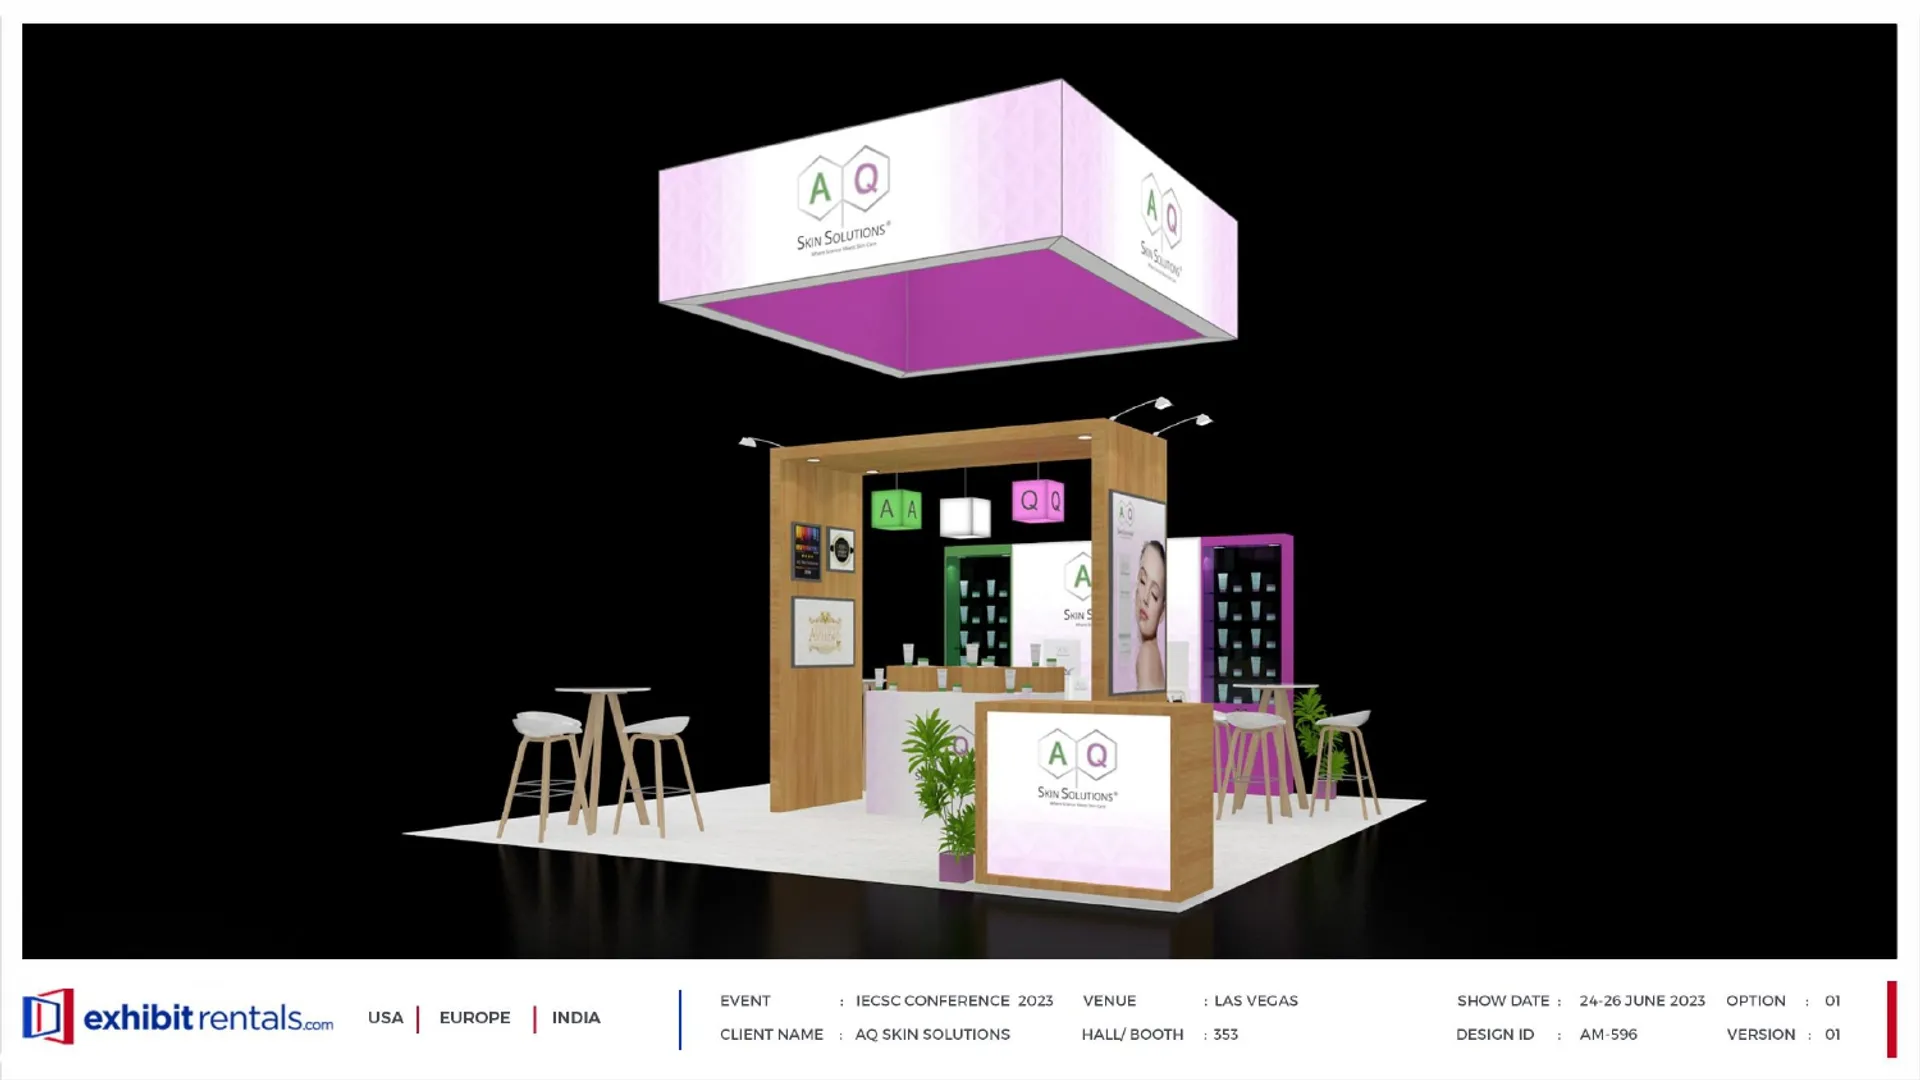 booth-design-projects/Exhibit-Rentals/2024-04-18-20x20-ISLAND-Project-85/1.1_AQ Skin Solutions_IECSC Conference_ER design proposal -13_page-0001-kpa8ph.jpg